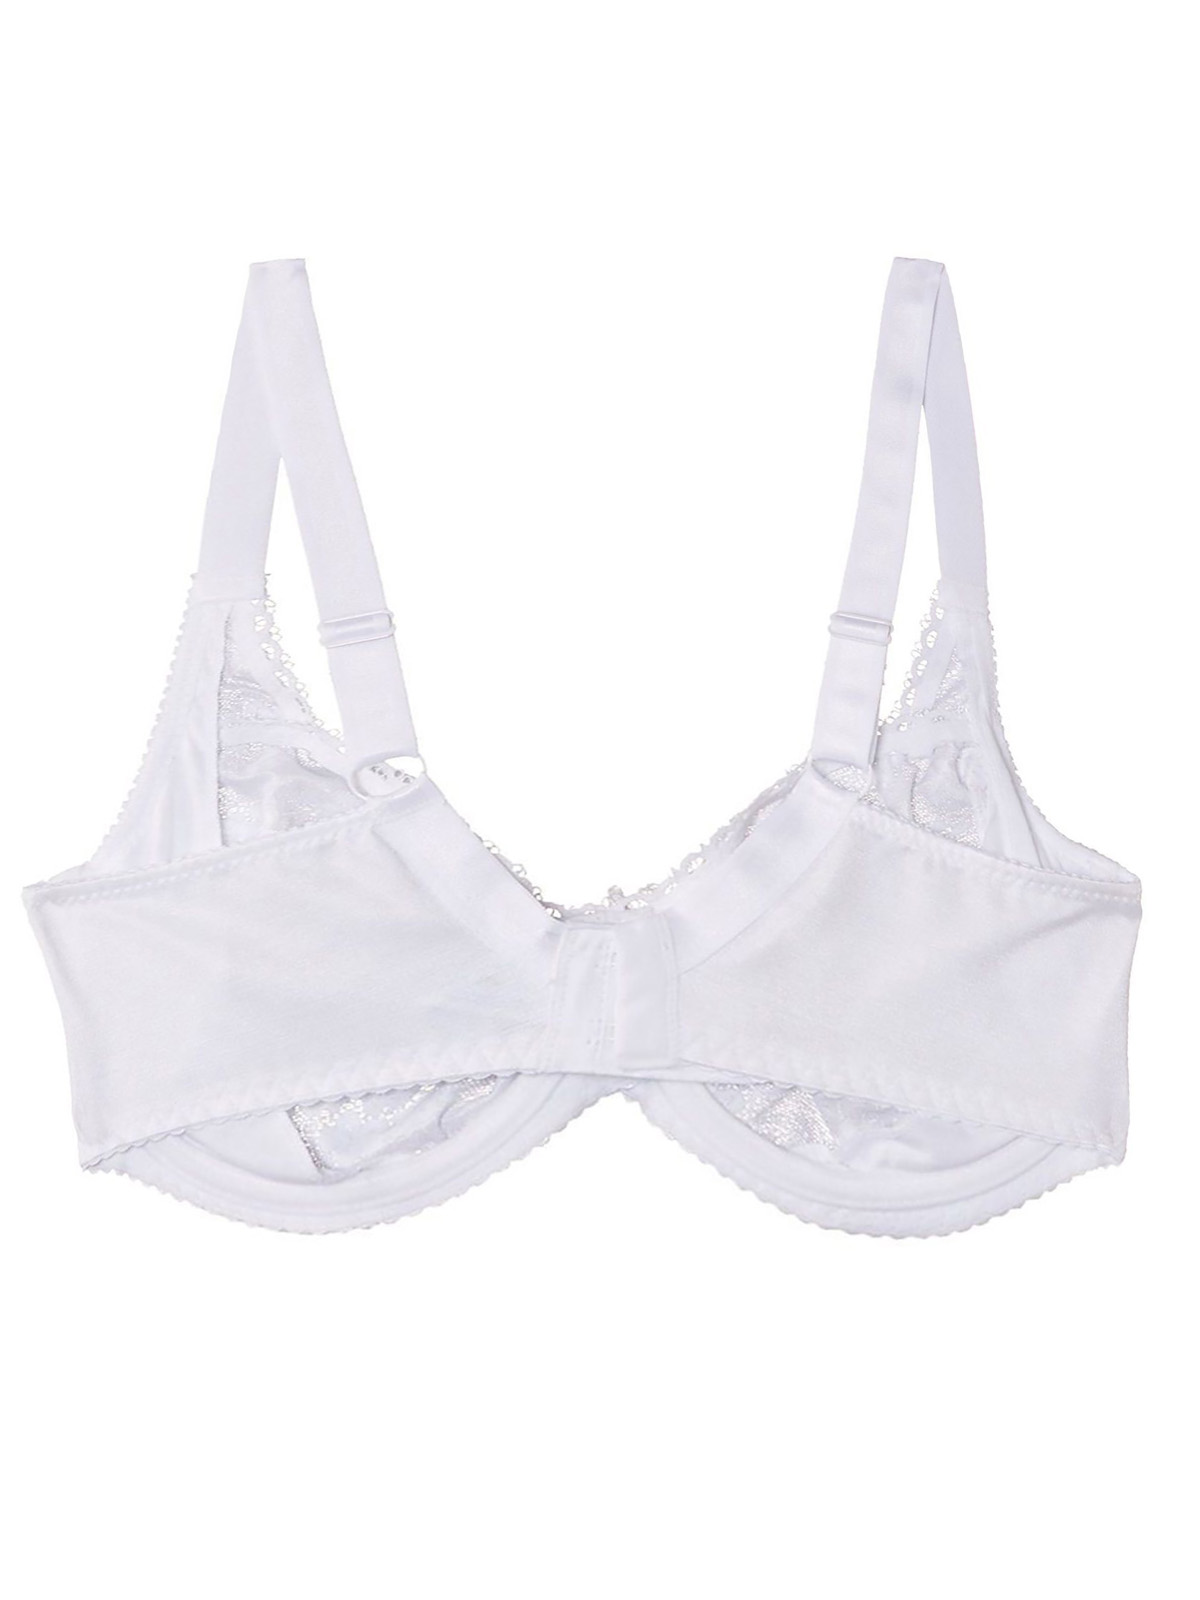 Naturana - - Naturana WHITE Wired Non-Padded Sheer Lace Full Cup Bra ...